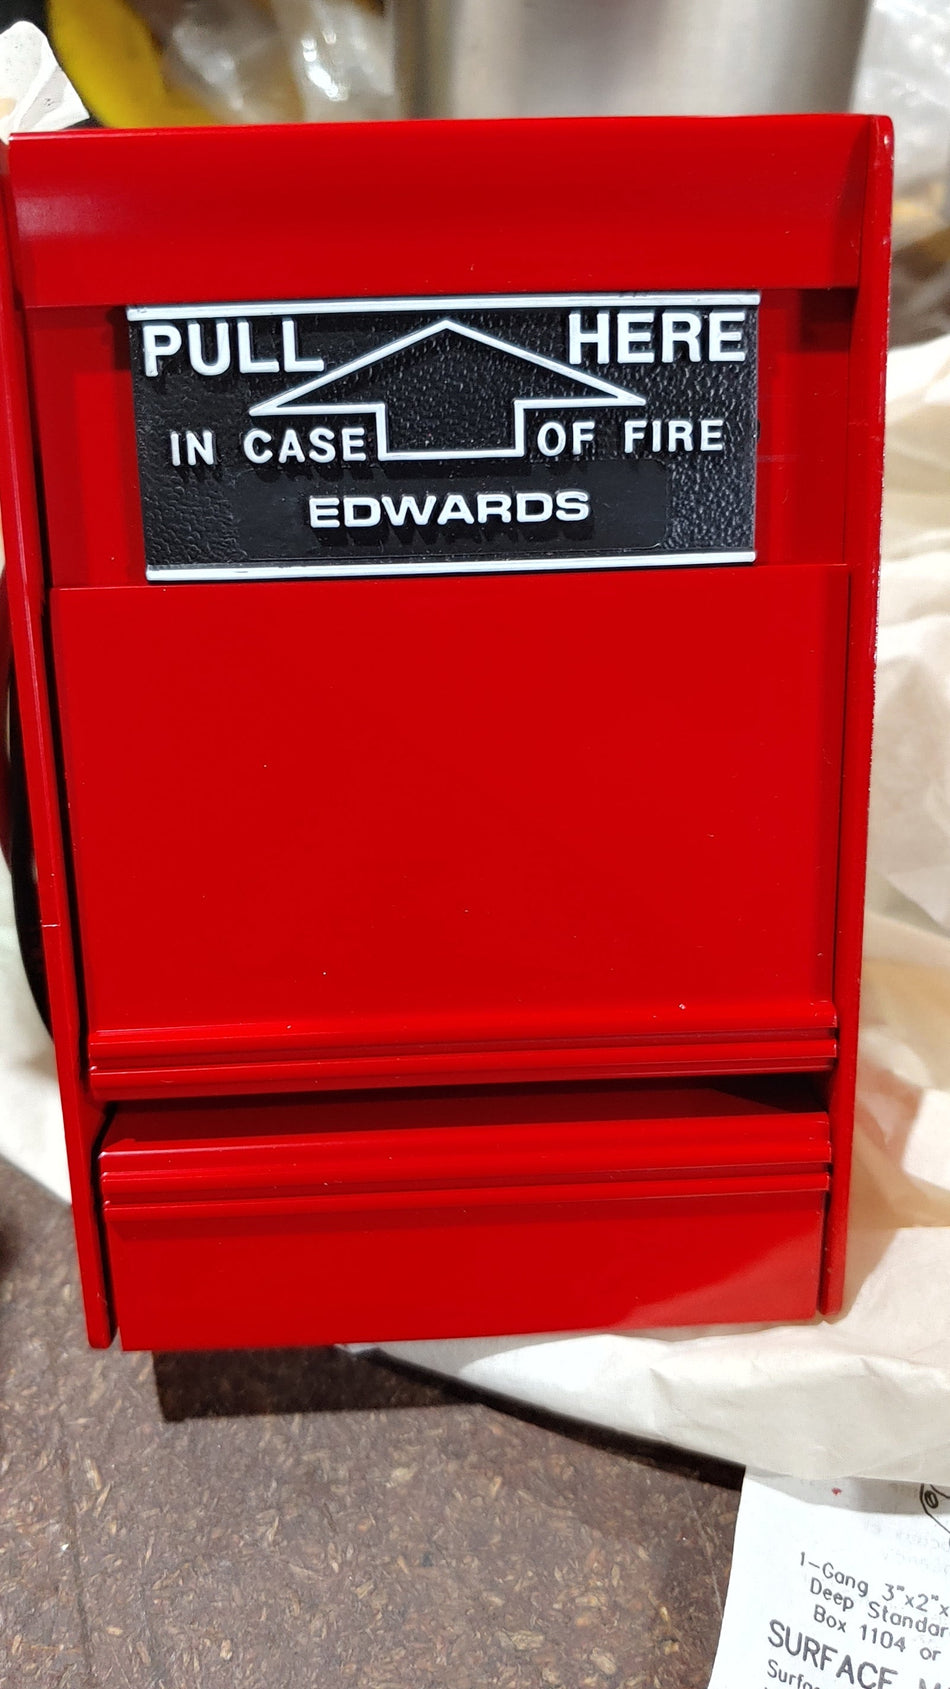 EDWARDS 275-SP0 FIRE ALARM MANUAL PULL STATION